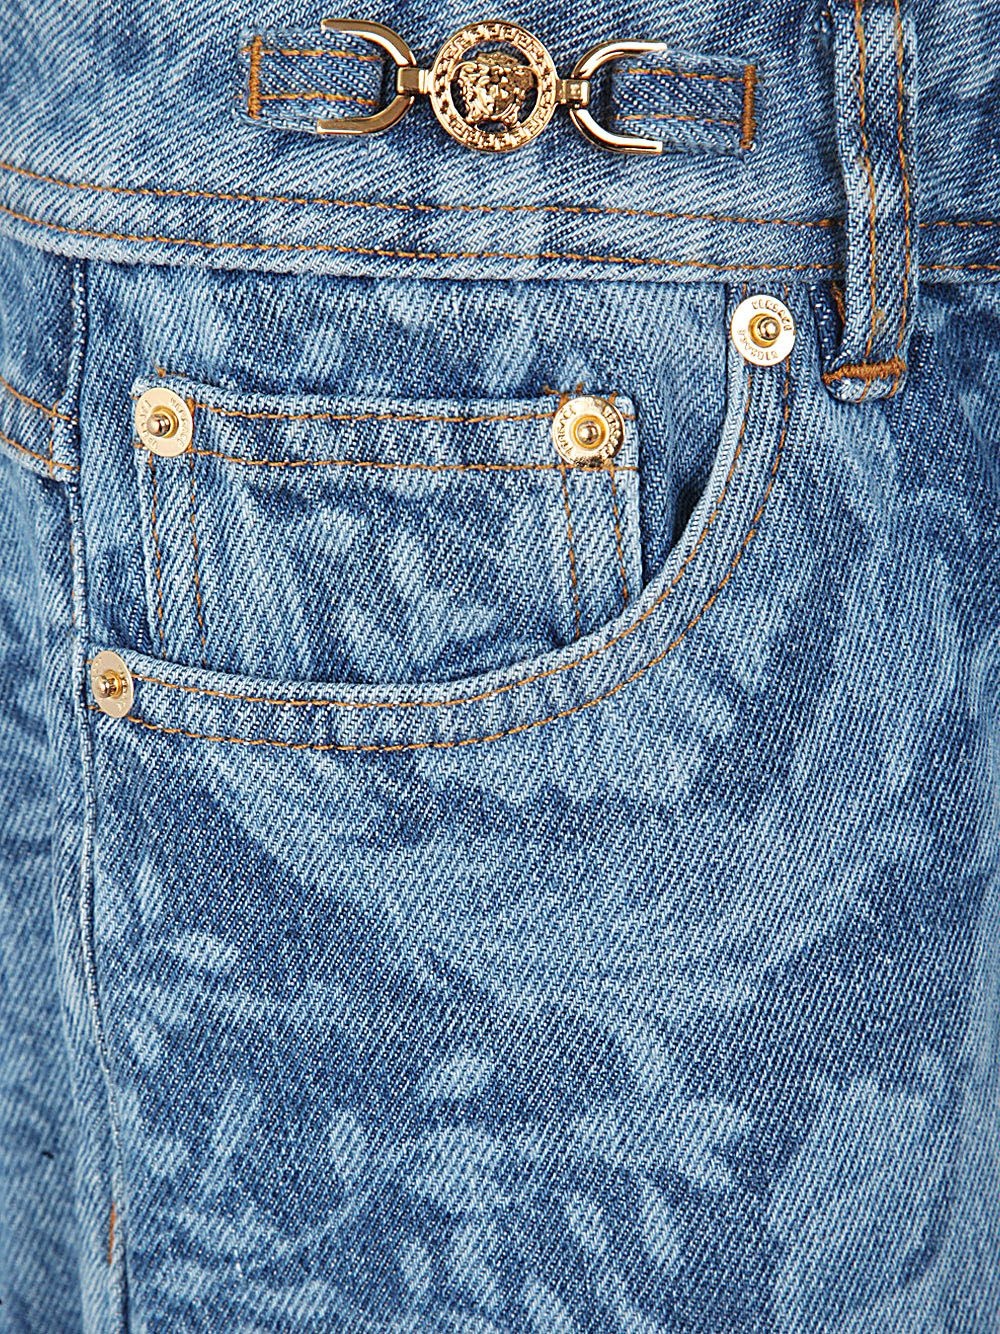 PANT DENIM LASER STONE WASH BAROQUE SERIES DENIM FABRIC WITH SPECIAL TREATMENT - 3